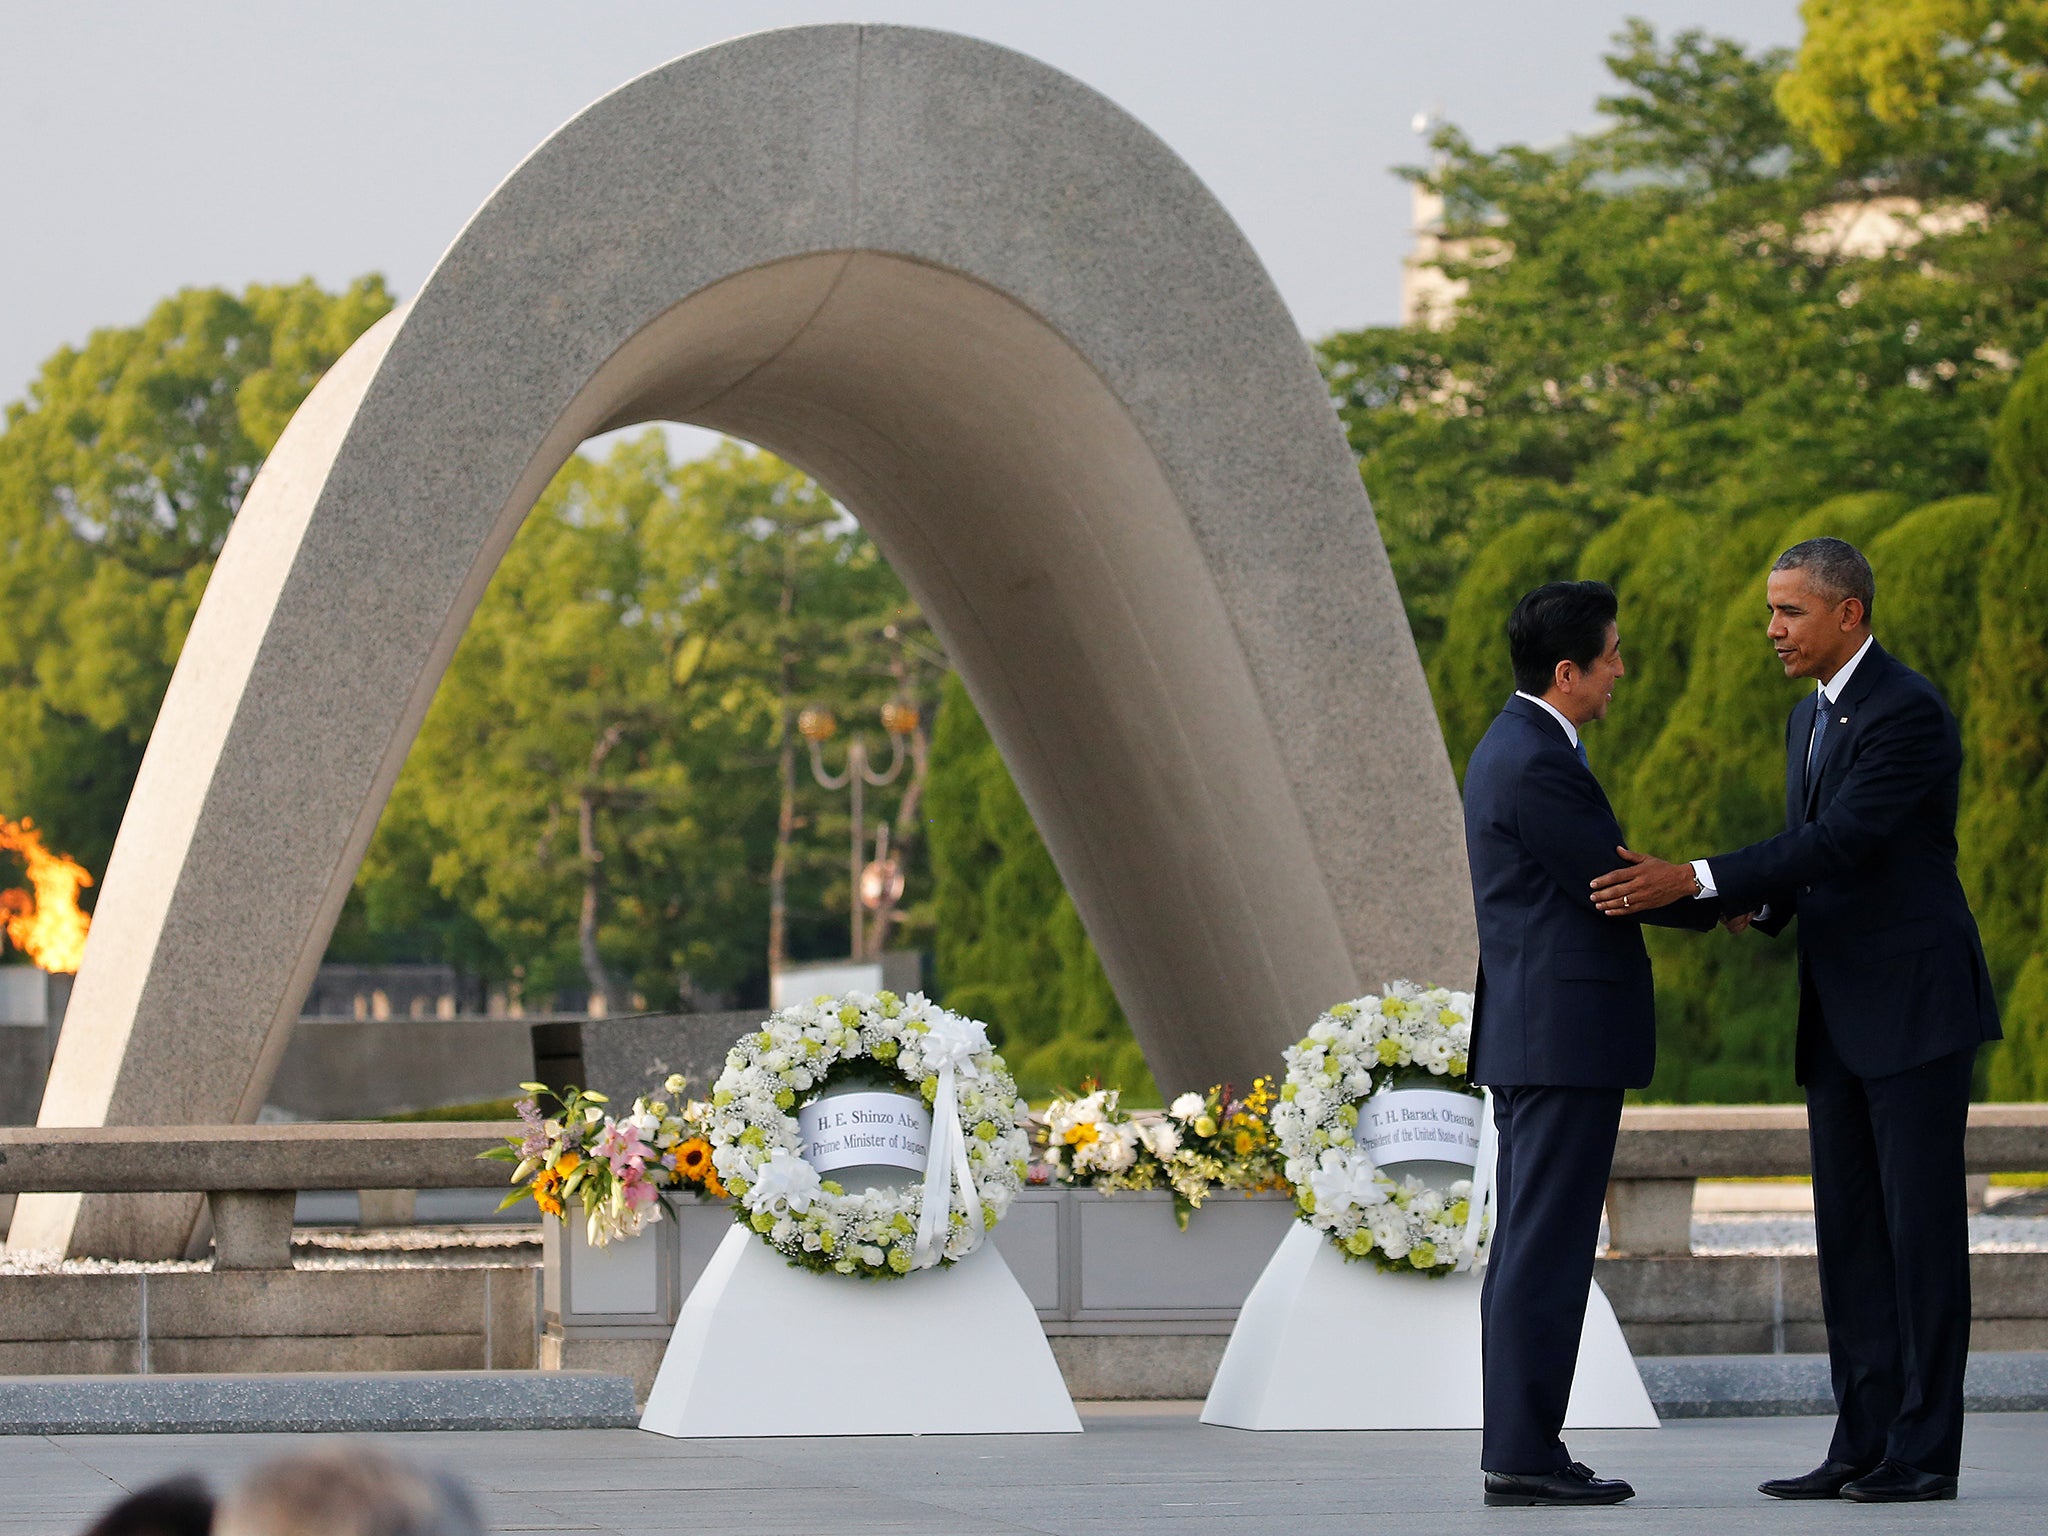 US President Barack Obama puts his arm around Japanese Prime Minister Shinzo Abe after they laid wreaths in front of a cenotaph at Hiroshima Peace Memorial Park in Japan on May 27 2016